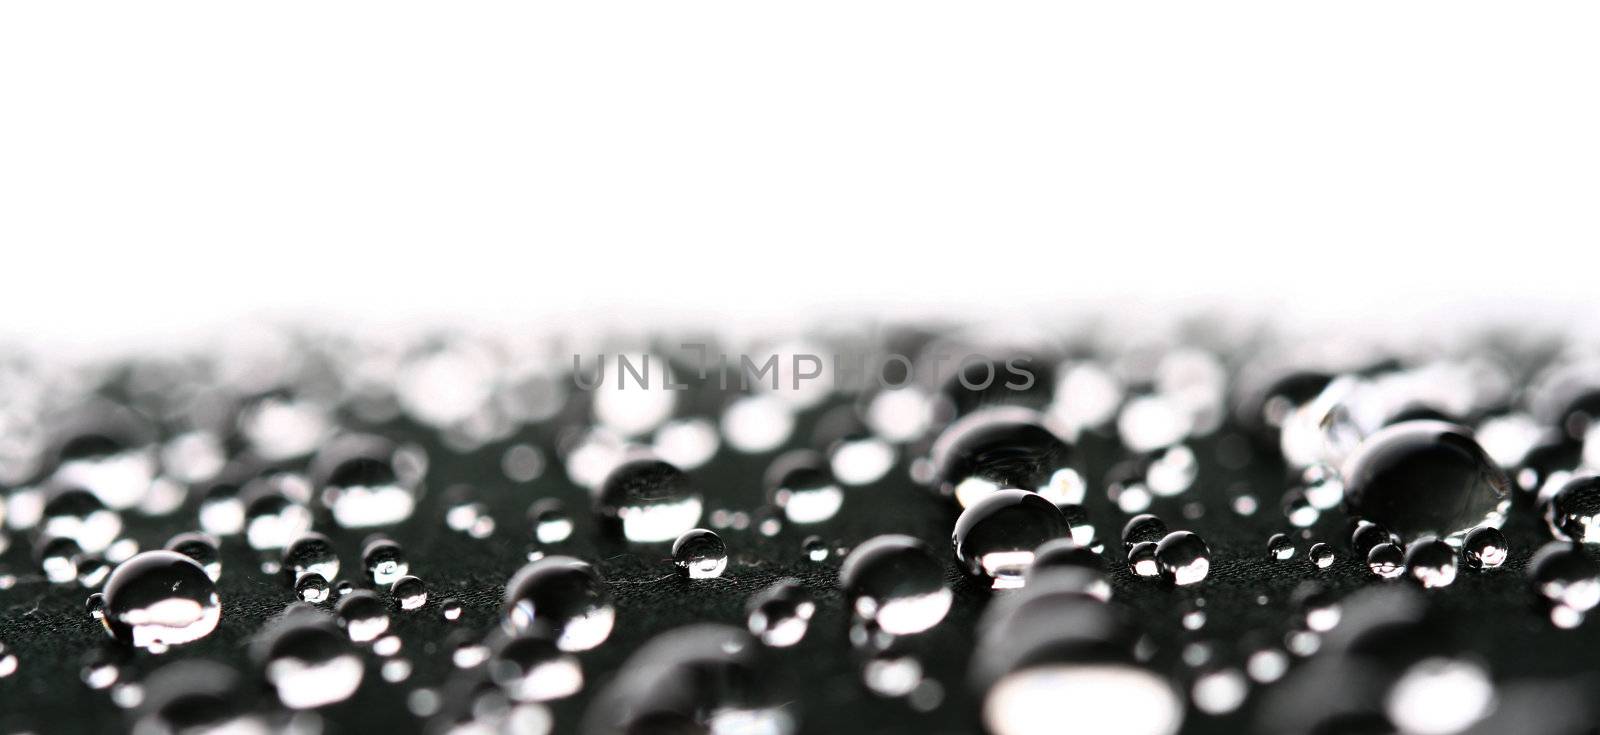 waterdrops background by Yellowj